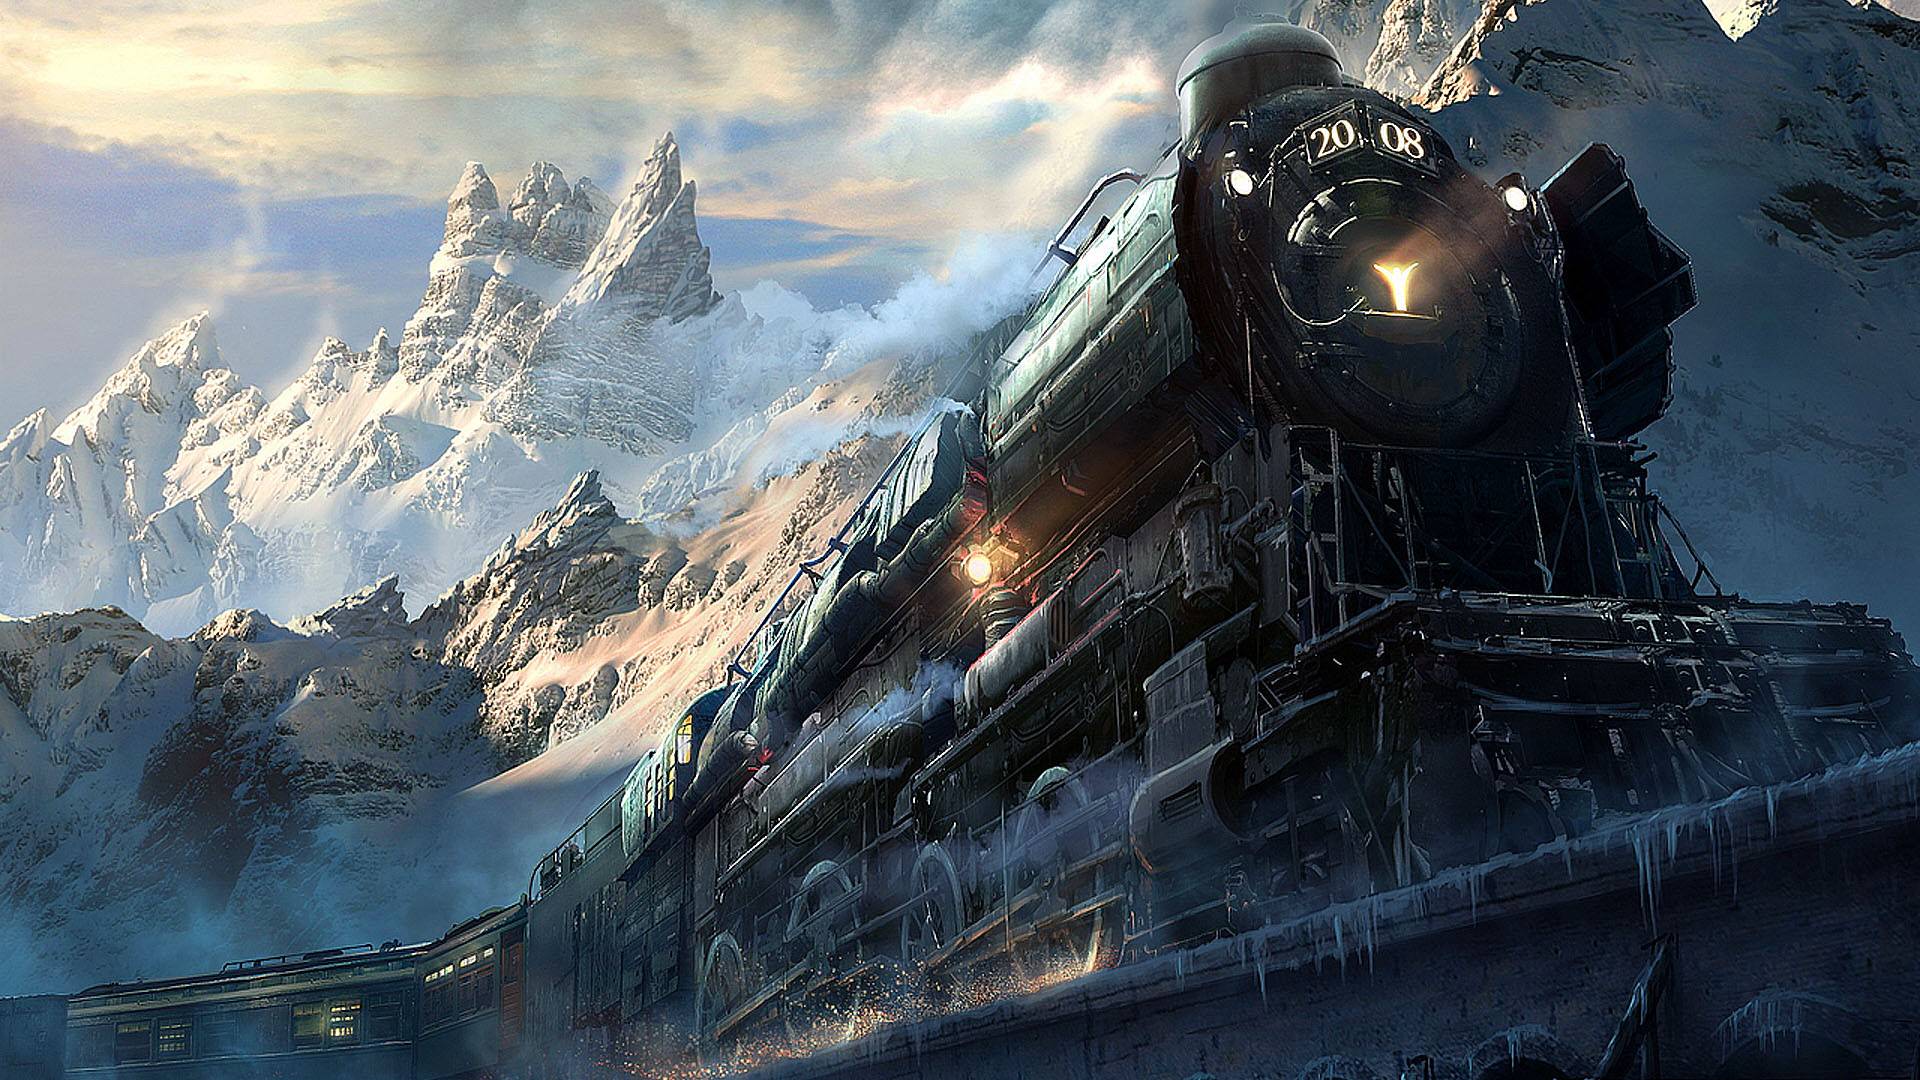 25+ Train Wallpapers, Backgrounds, Images, Pictures | Design Trends